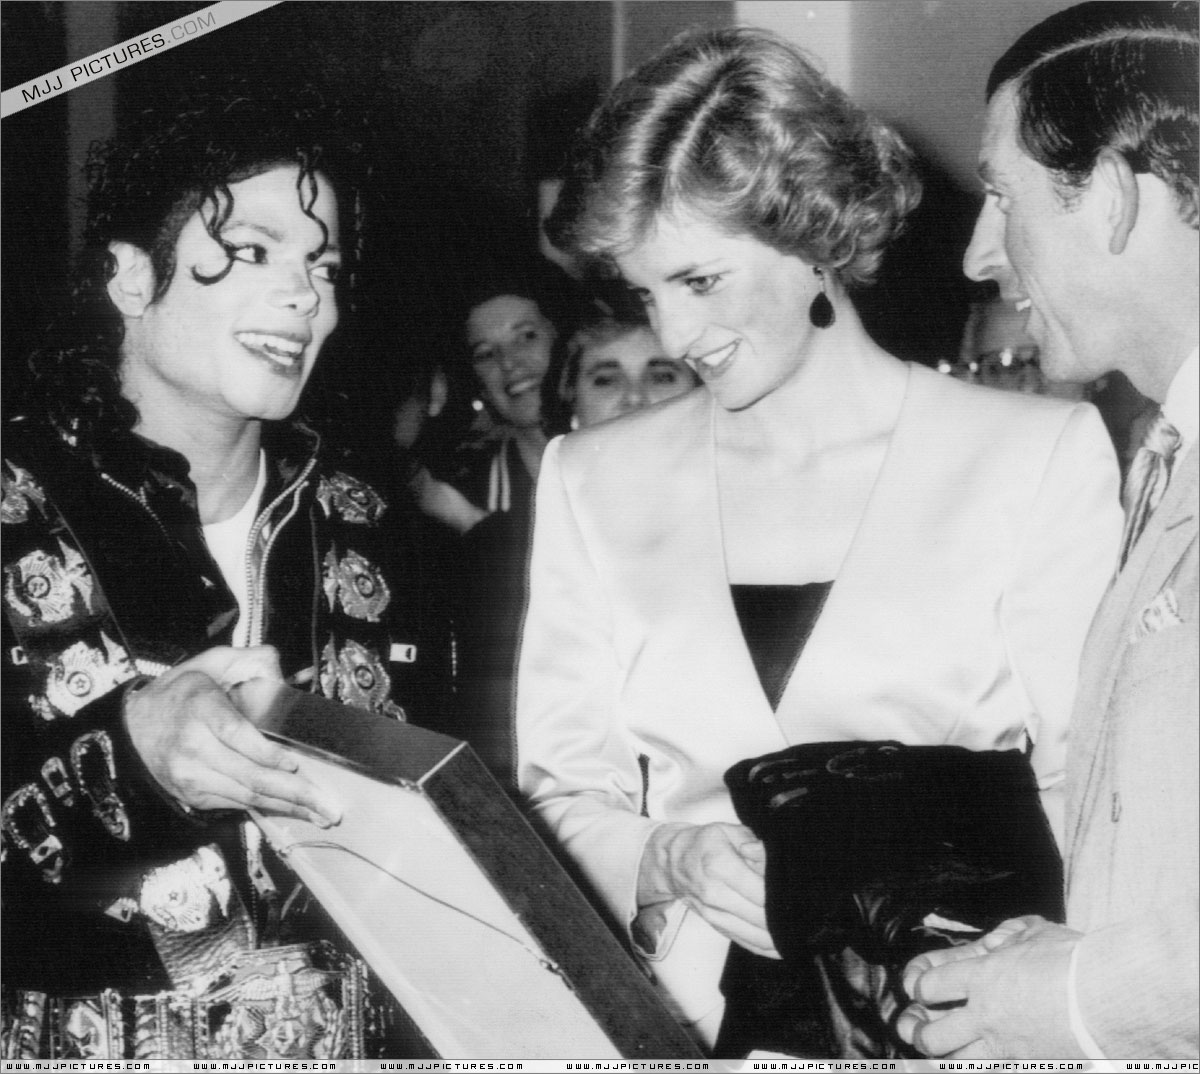 Michael meets Princess Diana & Prince Charles backstage before the concert.   015